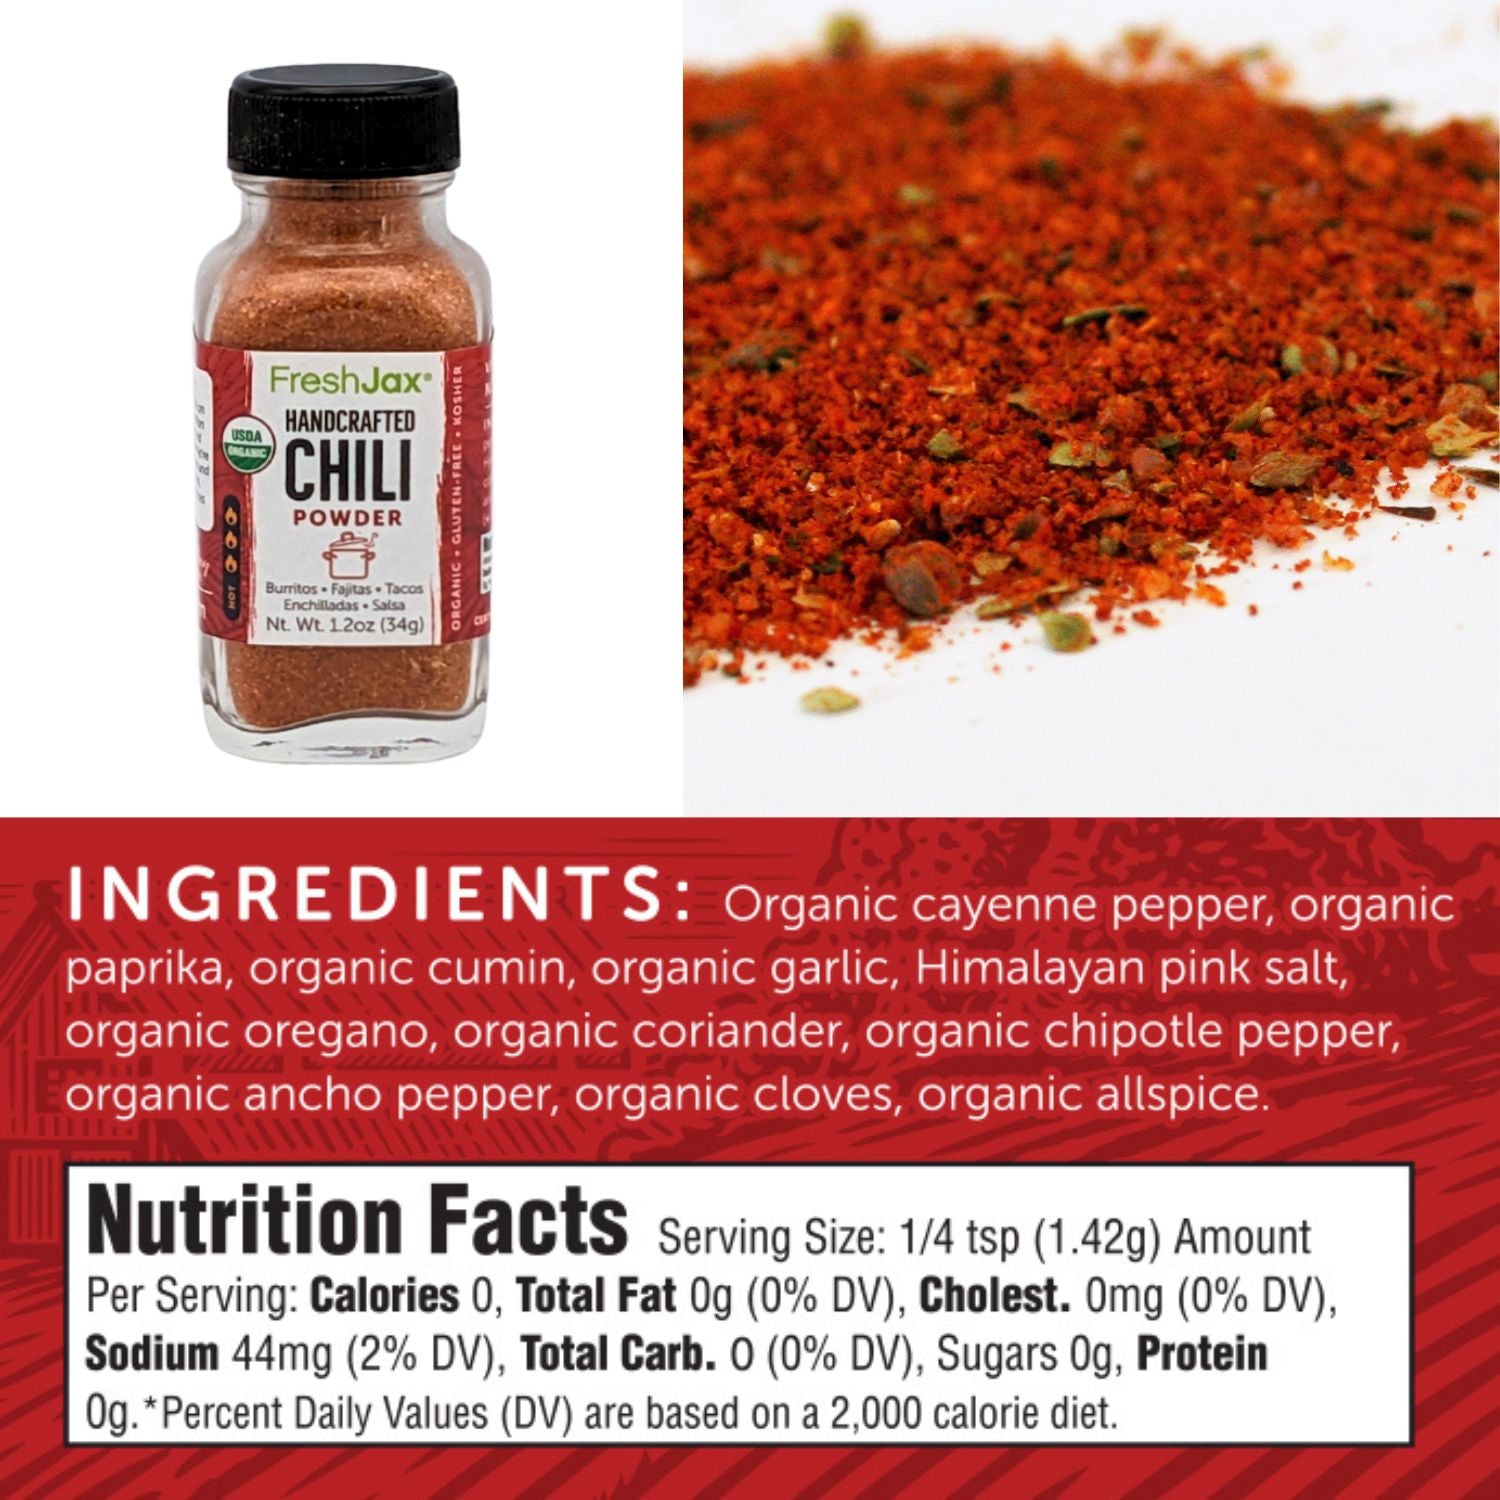 FreshJax Handcrafted Chili Powder Ingredients and Nutritional Information